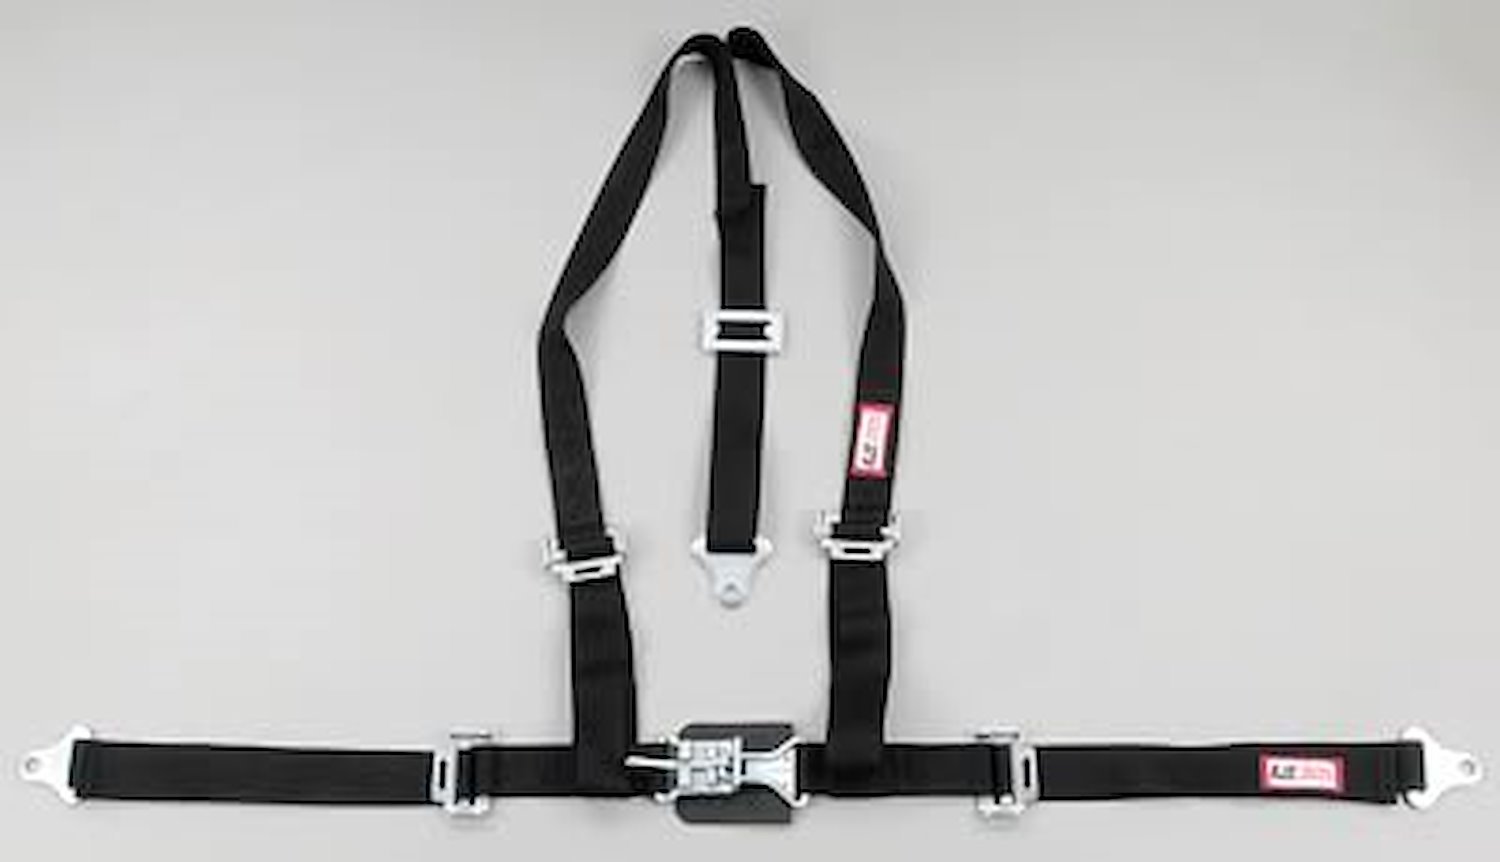 NON-SFI L&L HARNESS 3 PULL UP Lap Belt SNAP SEWN IN 2 S.H. Individual ROLL BAR Mount w/STERNUM STRAP WRAP/BOLT GRAY